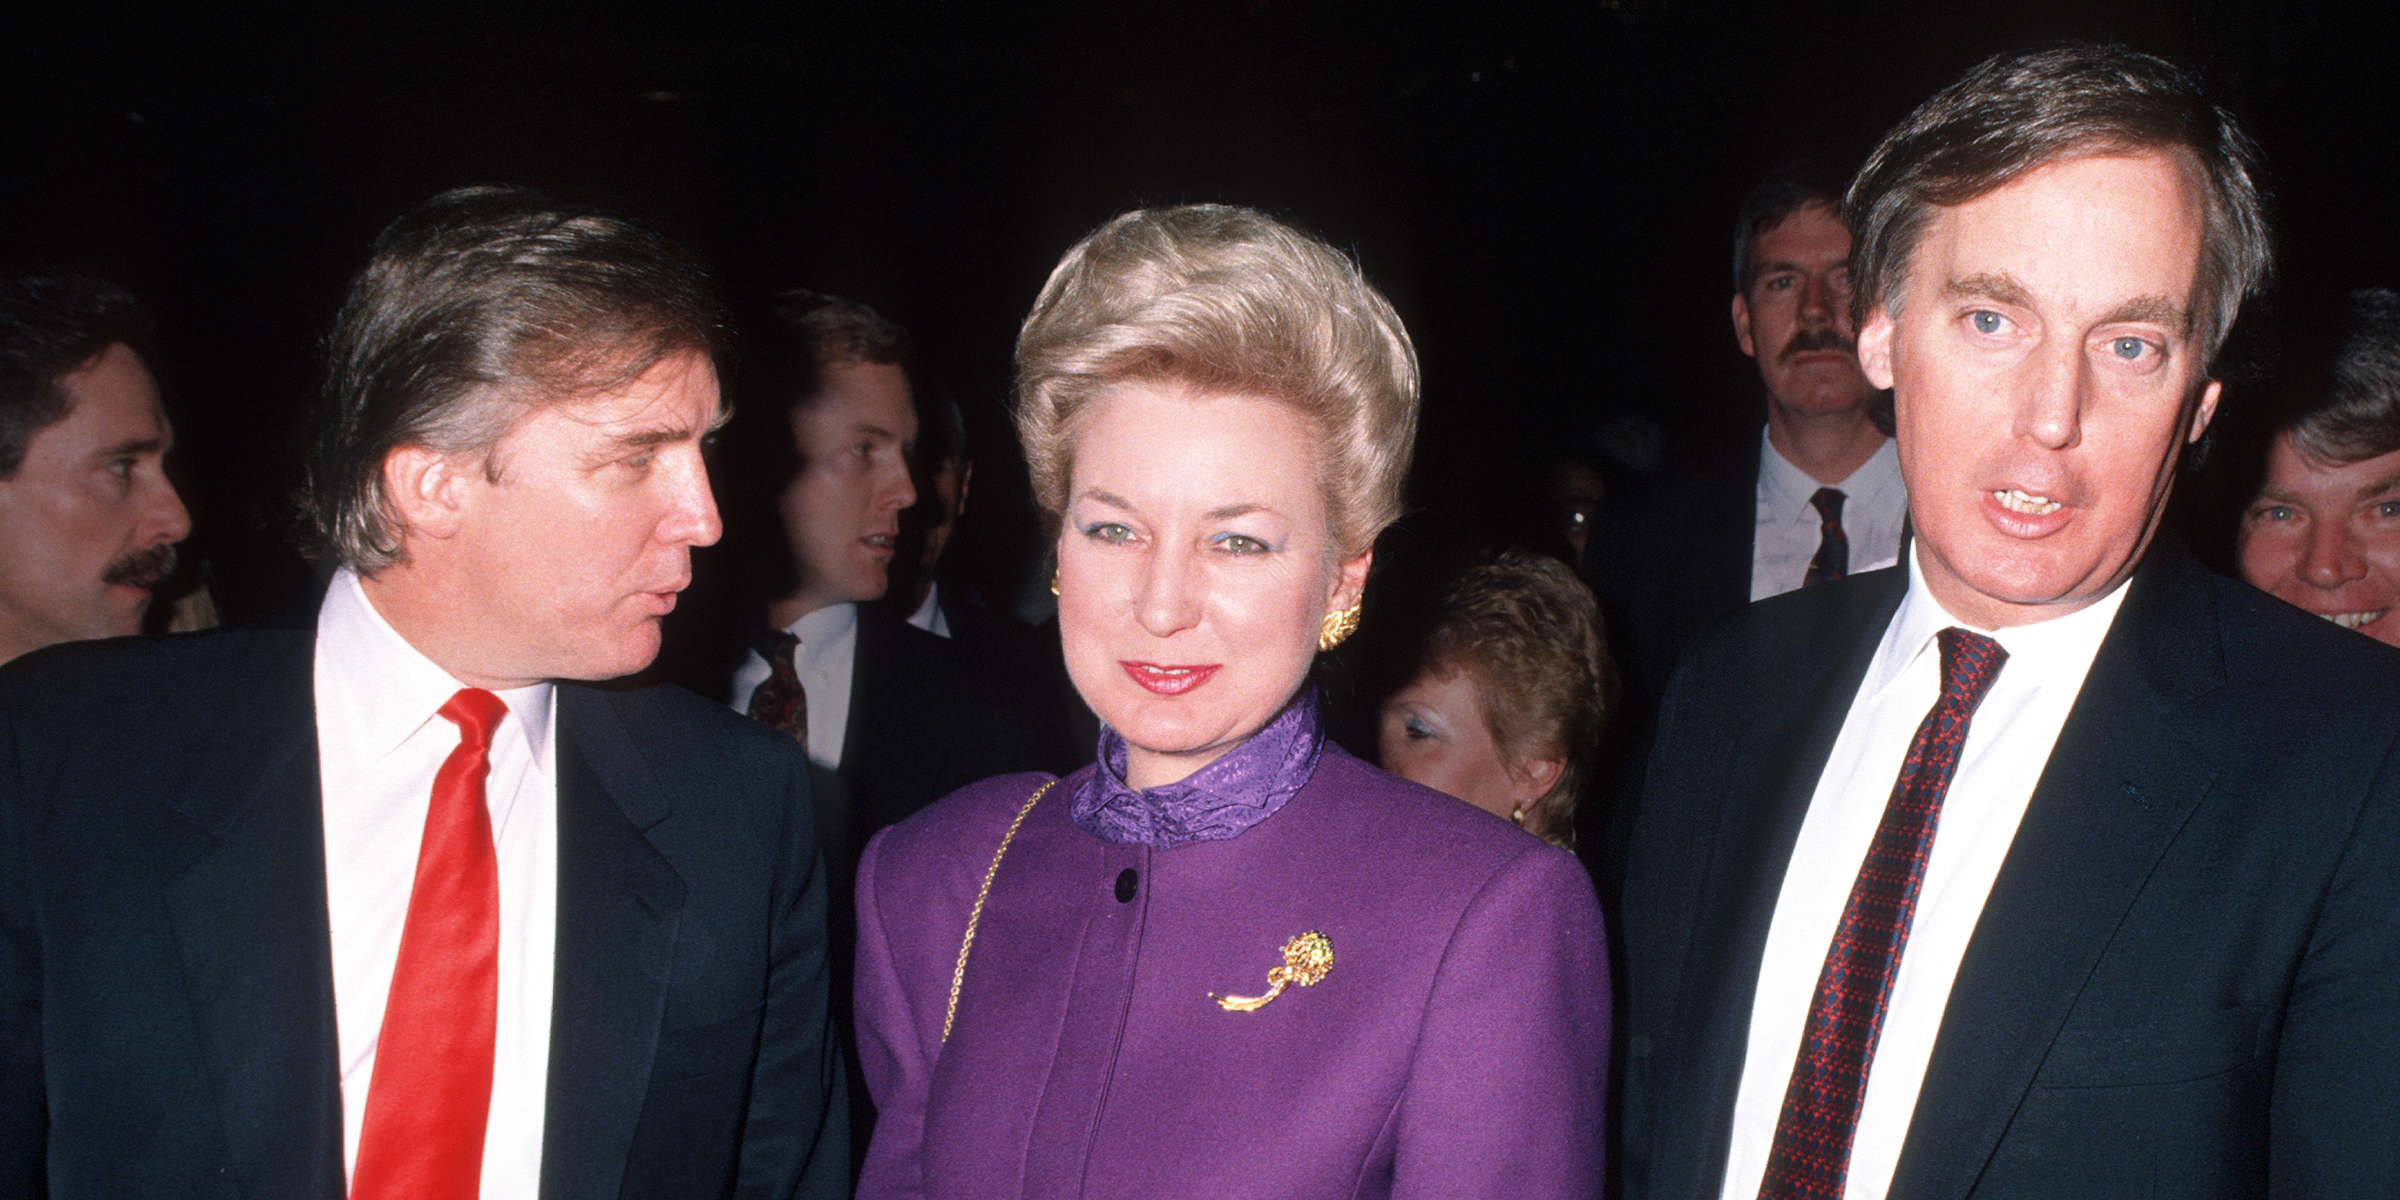 Donald Trump, Maryanne Trump Barry, and Robert Trump | Source: Getty images